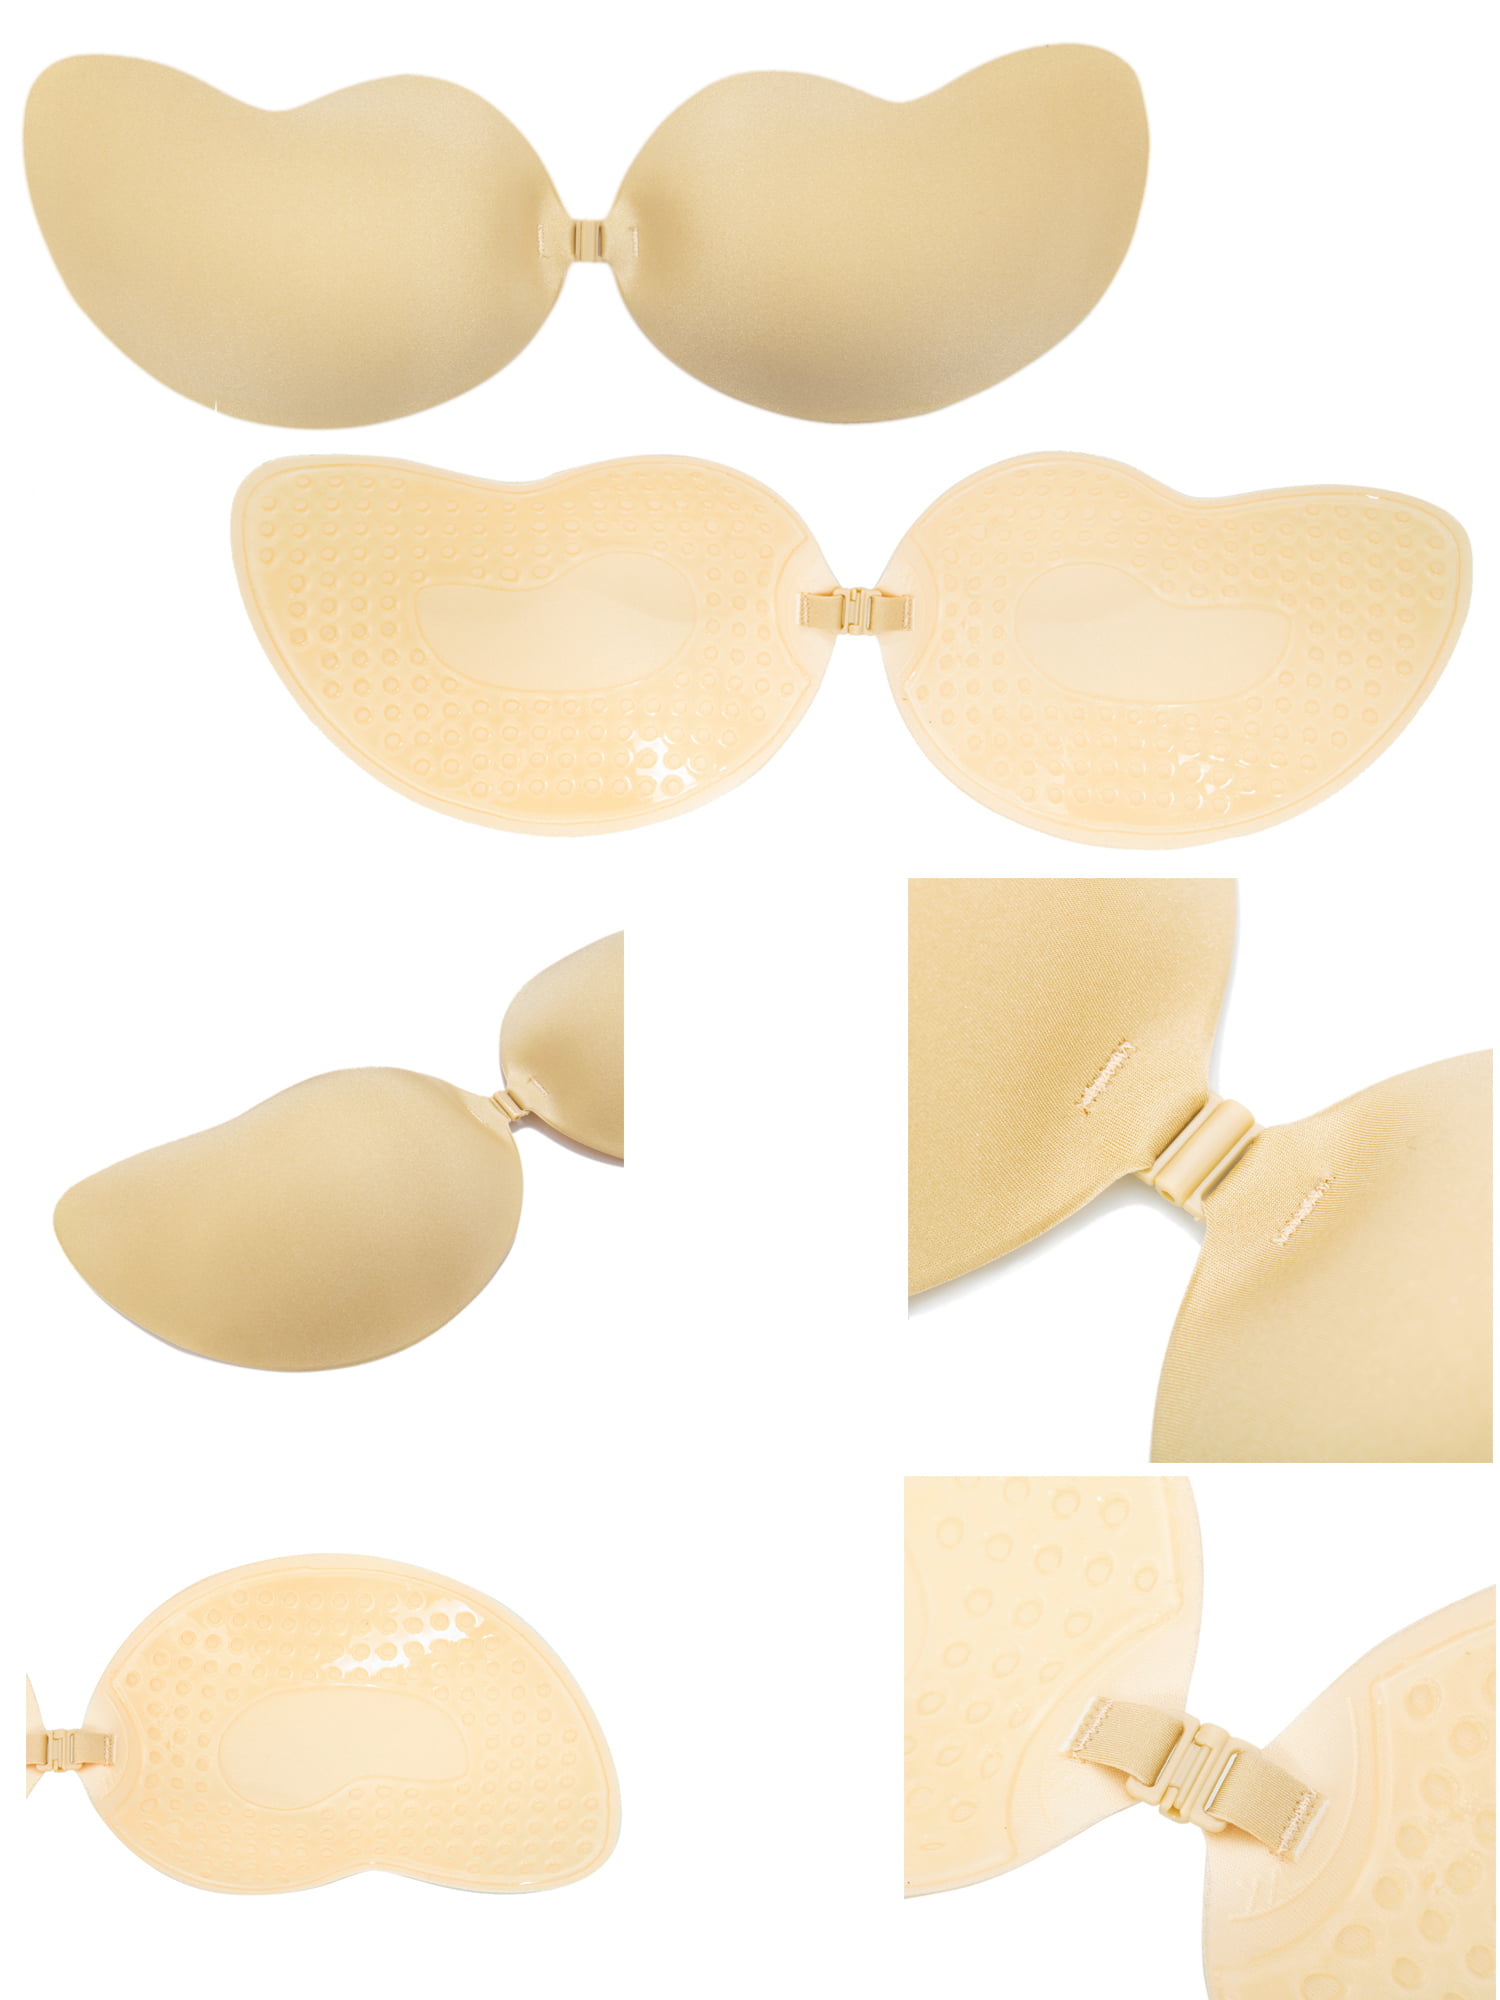 YouLoveIt Women Self-Adhesive Breast Lift Push Up Silicone